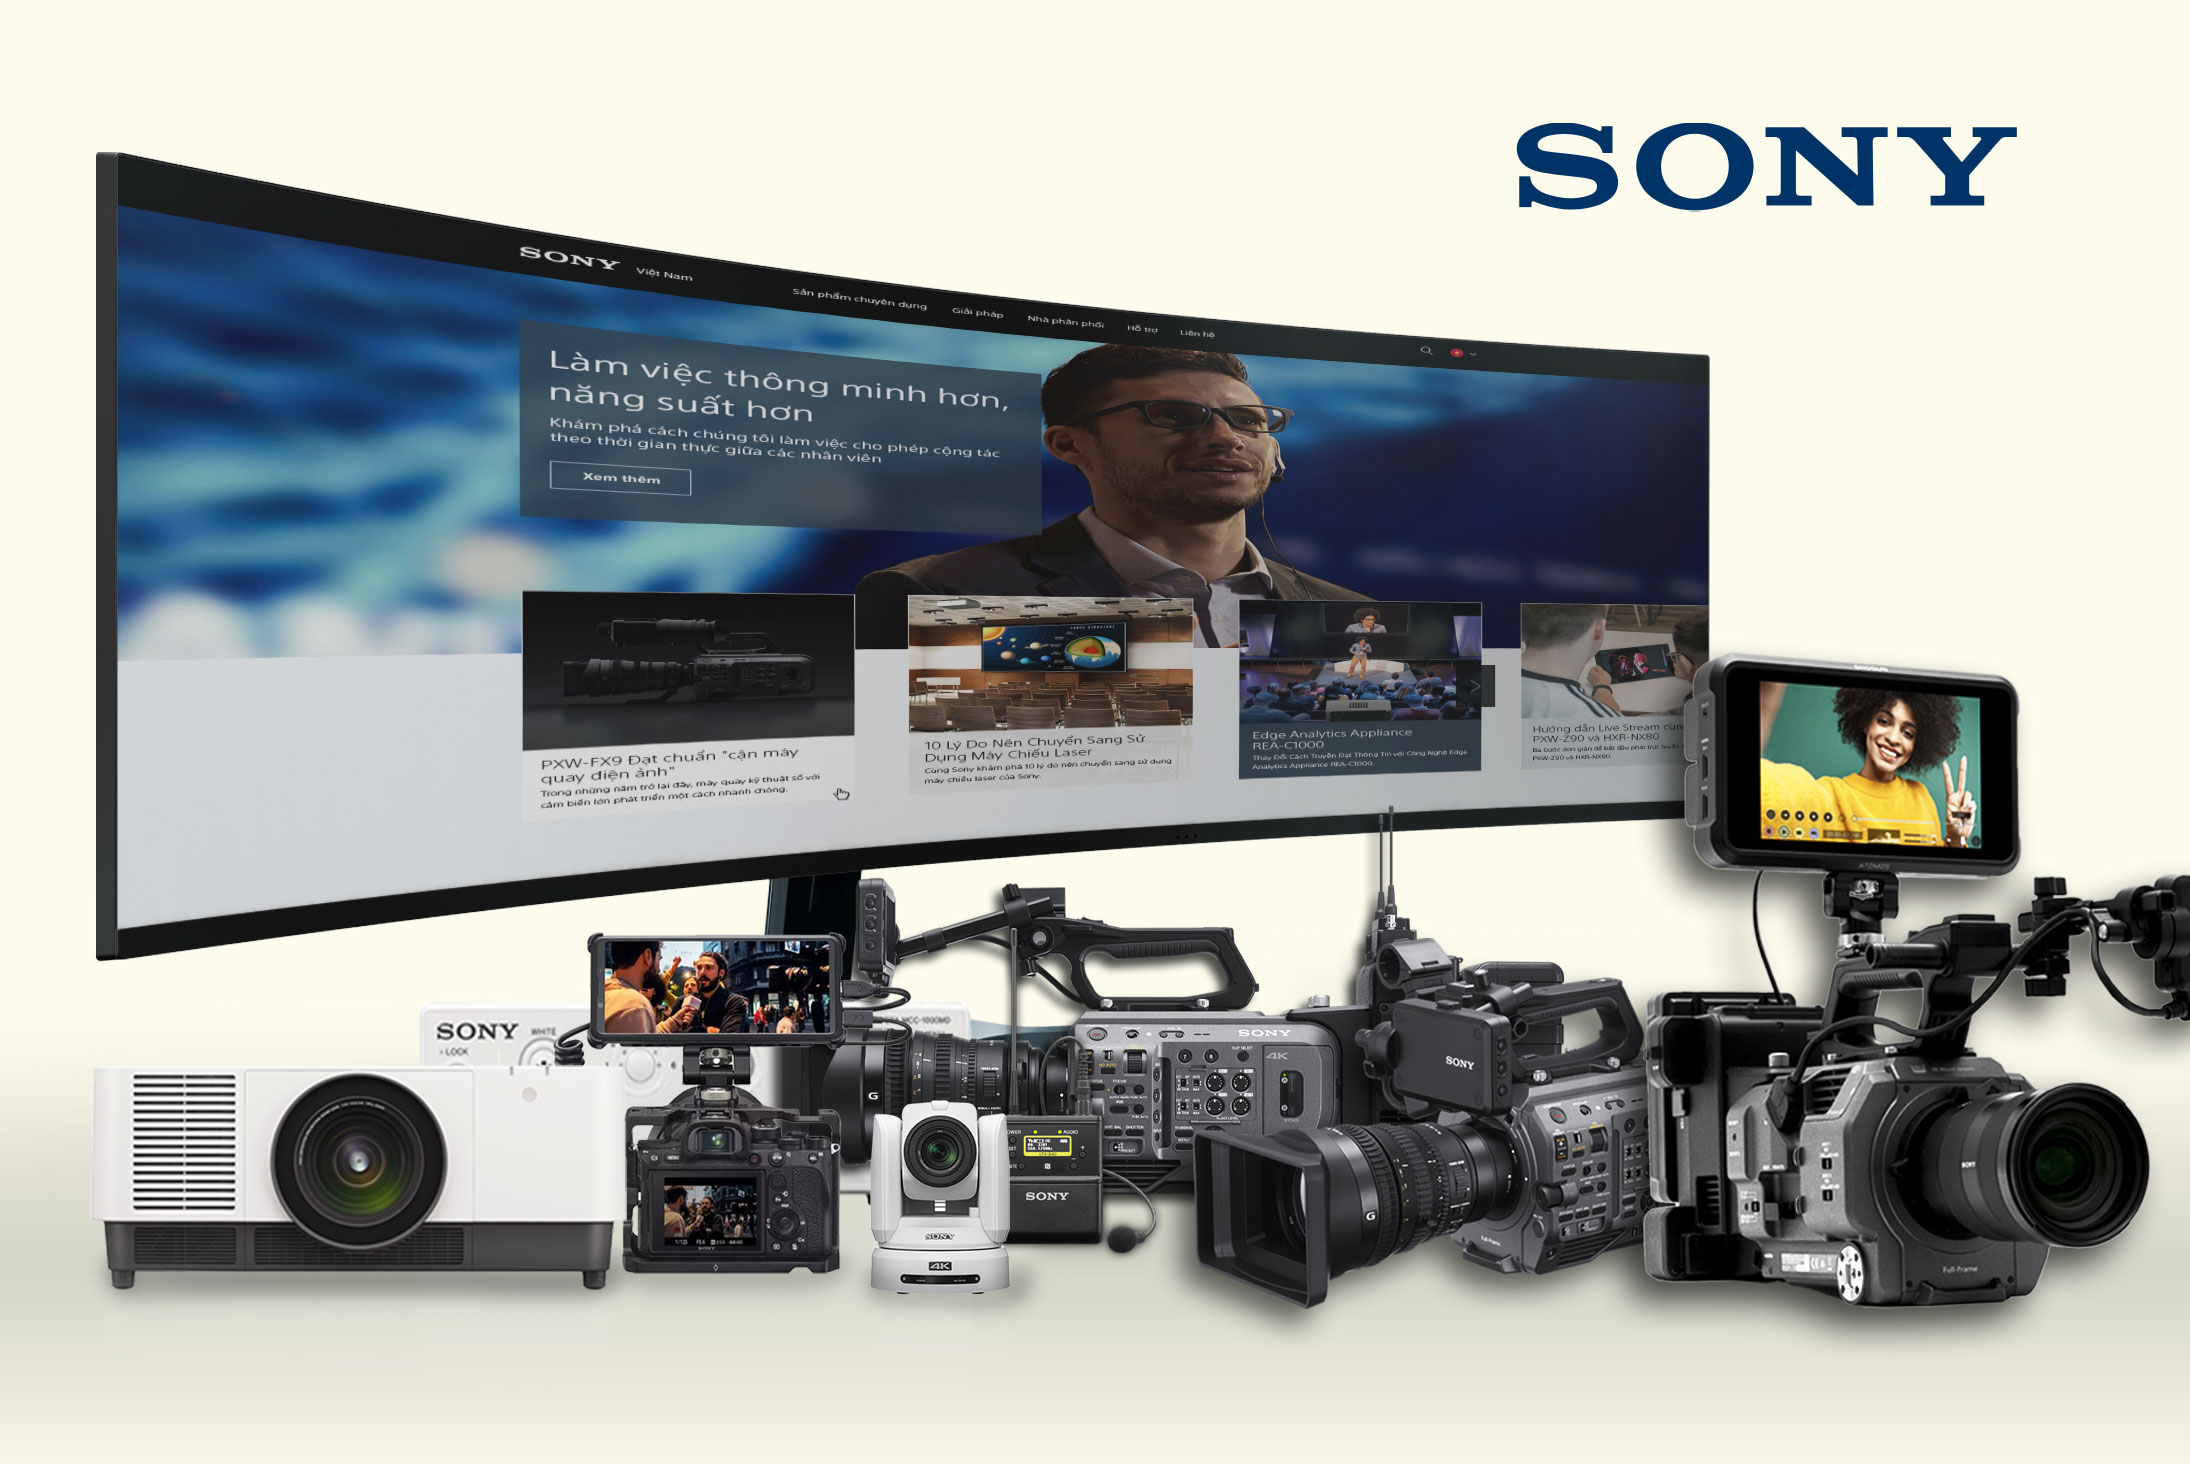 Sony ecomerce website design by Canh Cam image 5